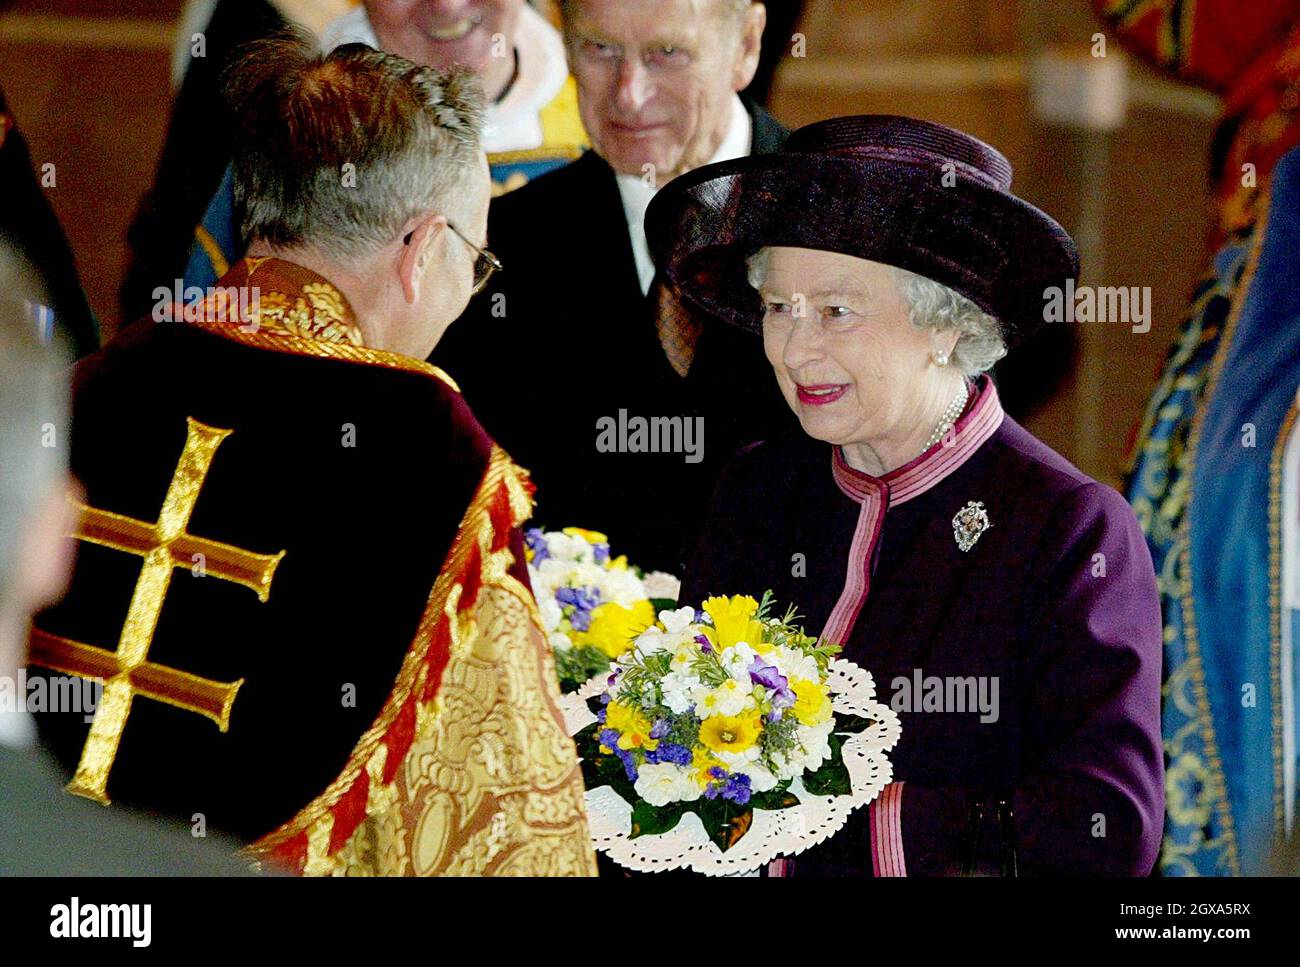 Queen Elizabeth II with the Duke of Edinburgh, is greeted by the Reverend Rupert Hoare, during the Royal Maundy Service held at Liverpool's Anglican Cathedral, Thursday April 8 2004. The Queen arrived in Liverpool today wearing a purple suit with a pink trim and matching hat, to take part in the ancient Maundy Thursday ceremony.    Stock Photo